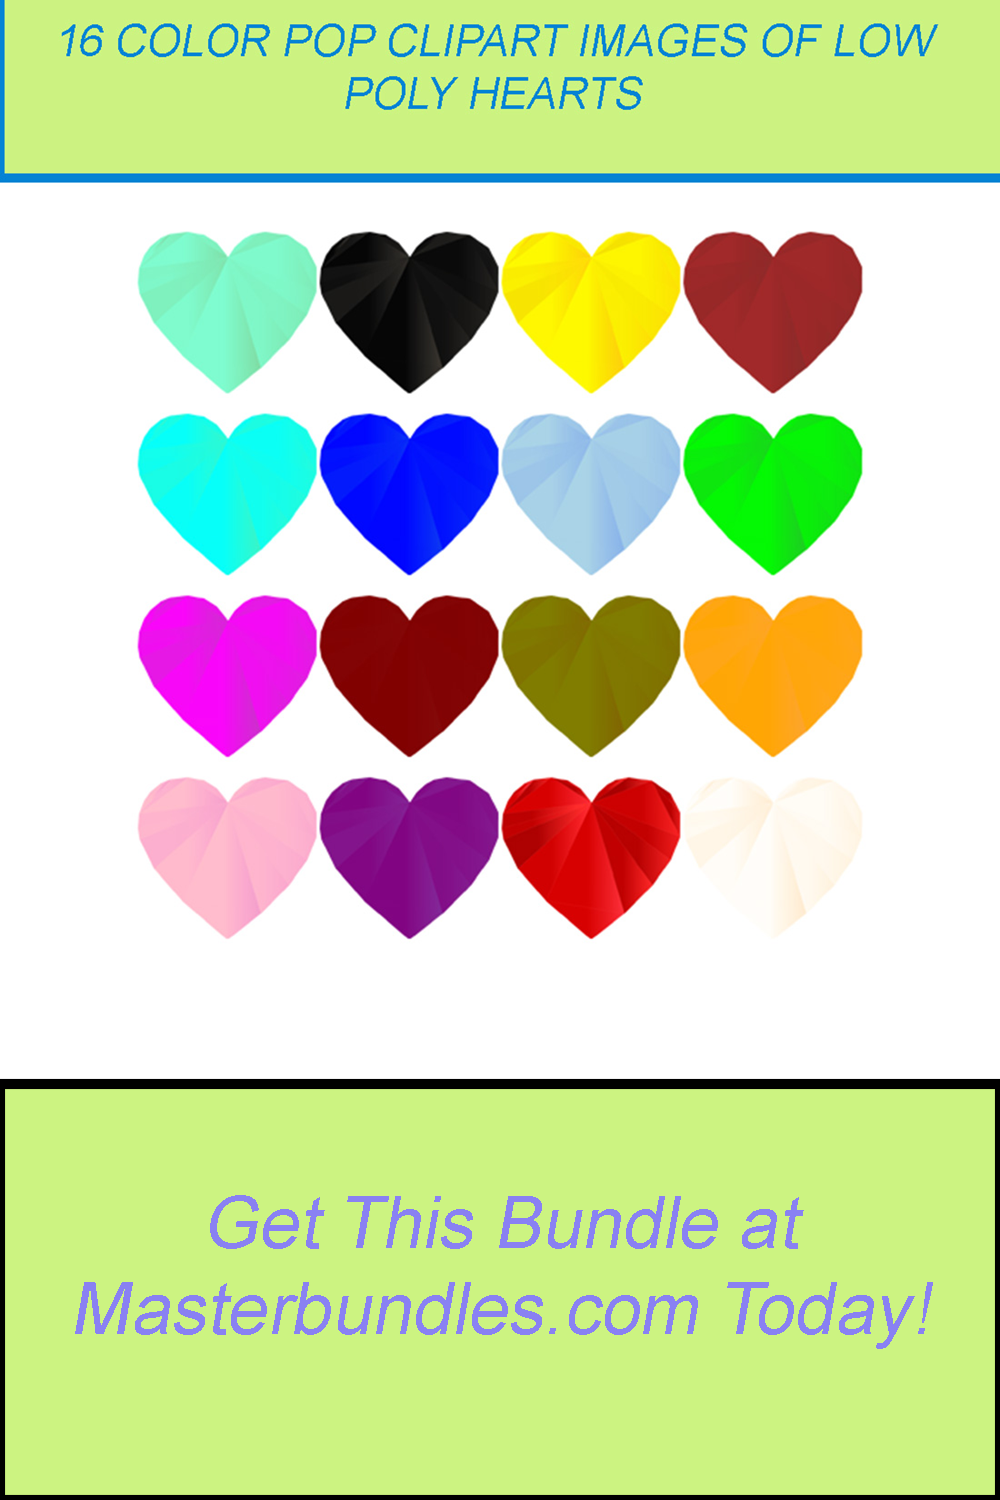 16 COLOR POP CLIPART IMAGES OF HEART LOW POLY pinterest preview image.